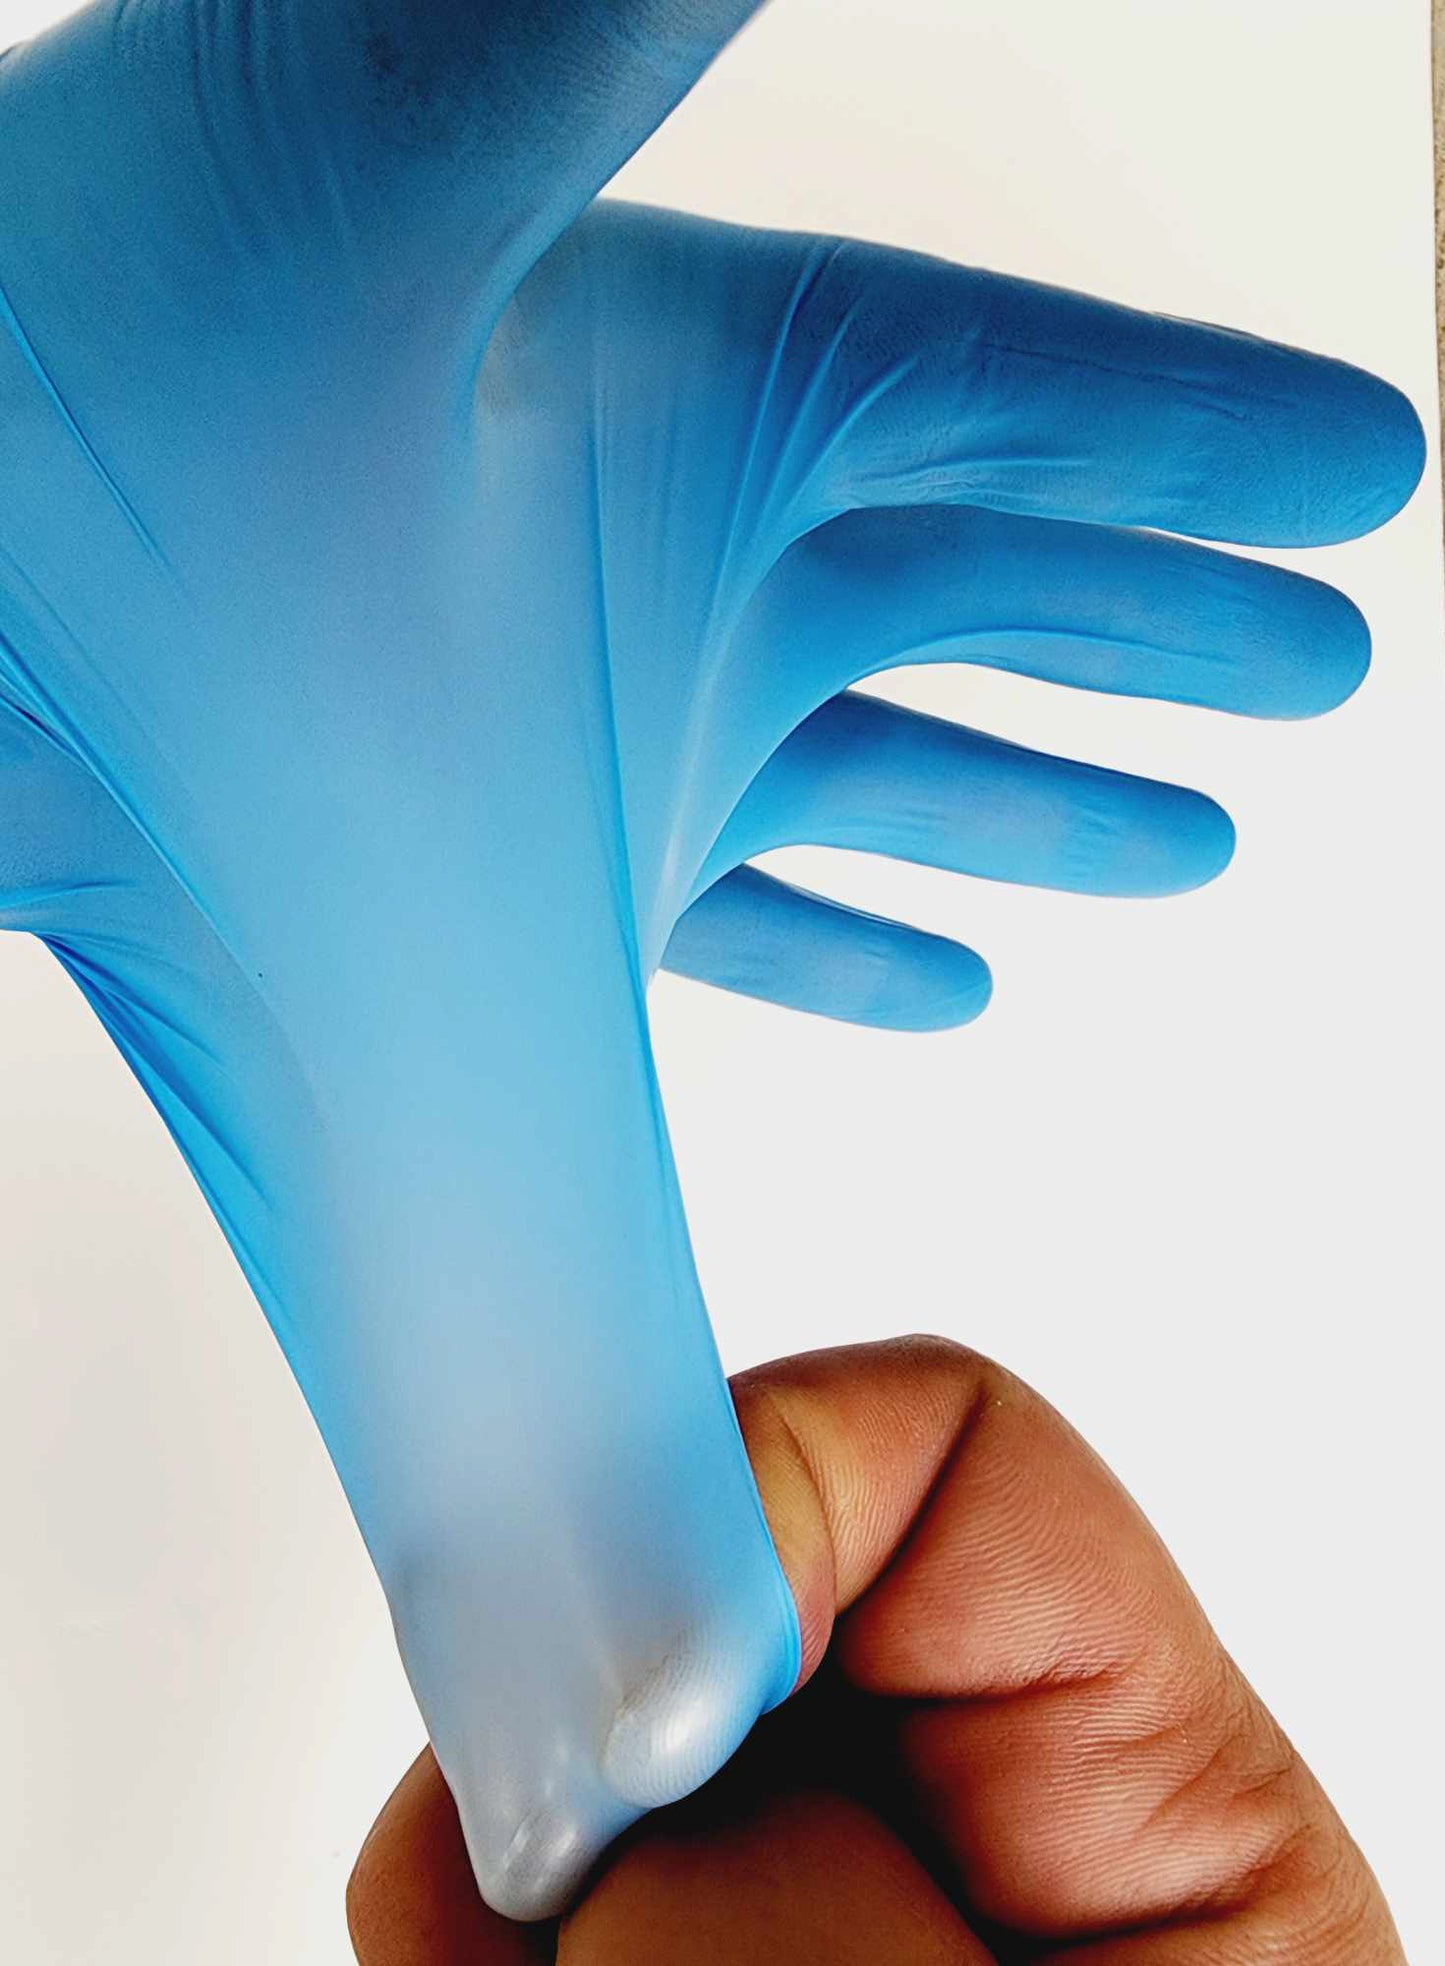 Blue Nitrile Gloves XS Ally-Precision Surgical